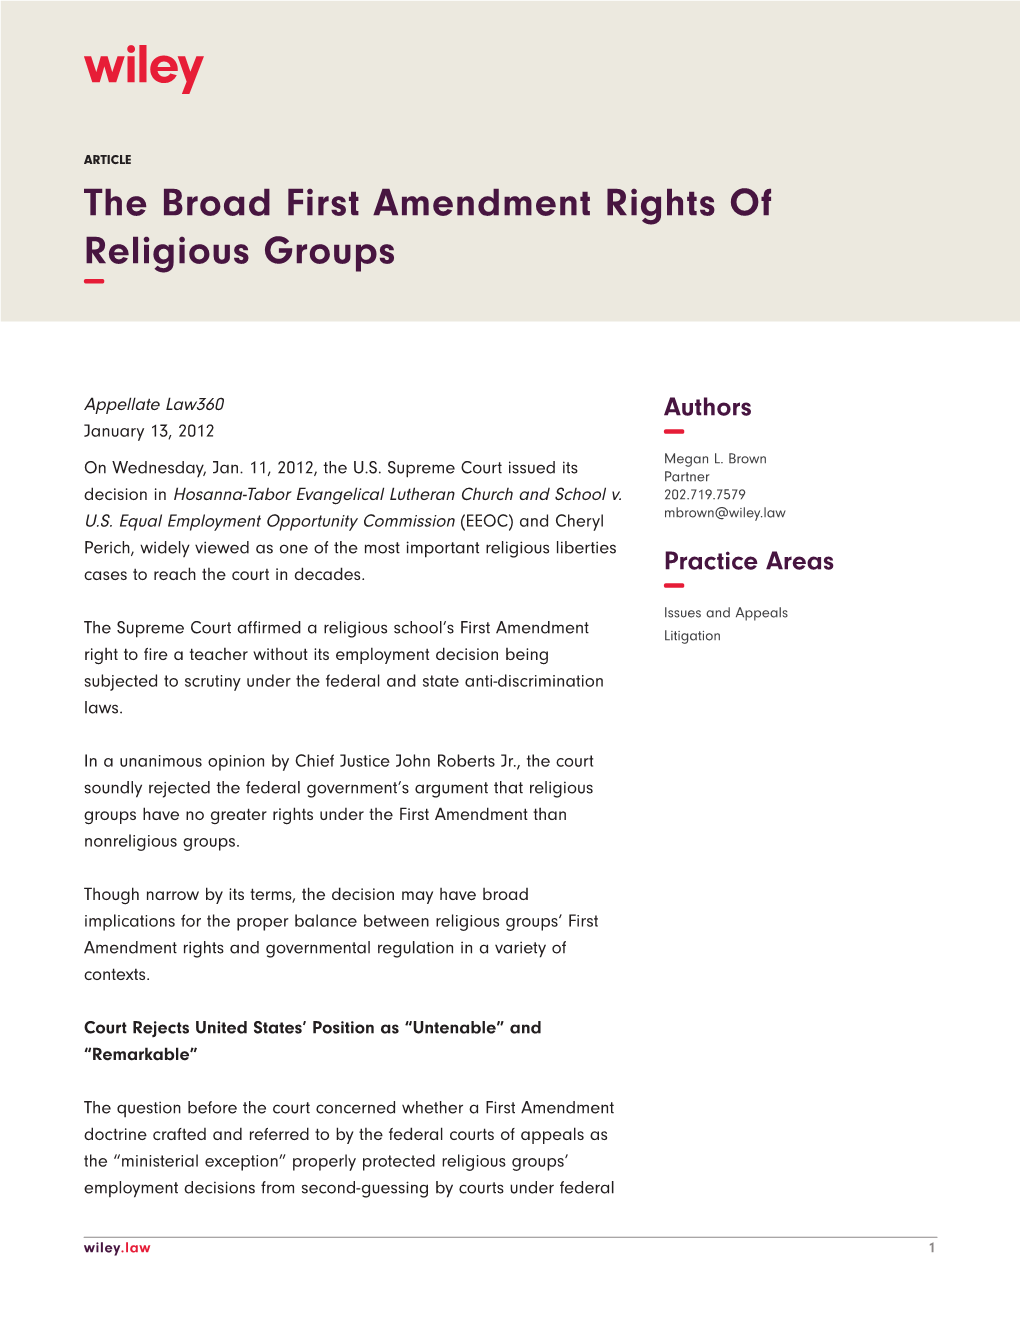 The Broad First Amendment Rights of Religious Groups −